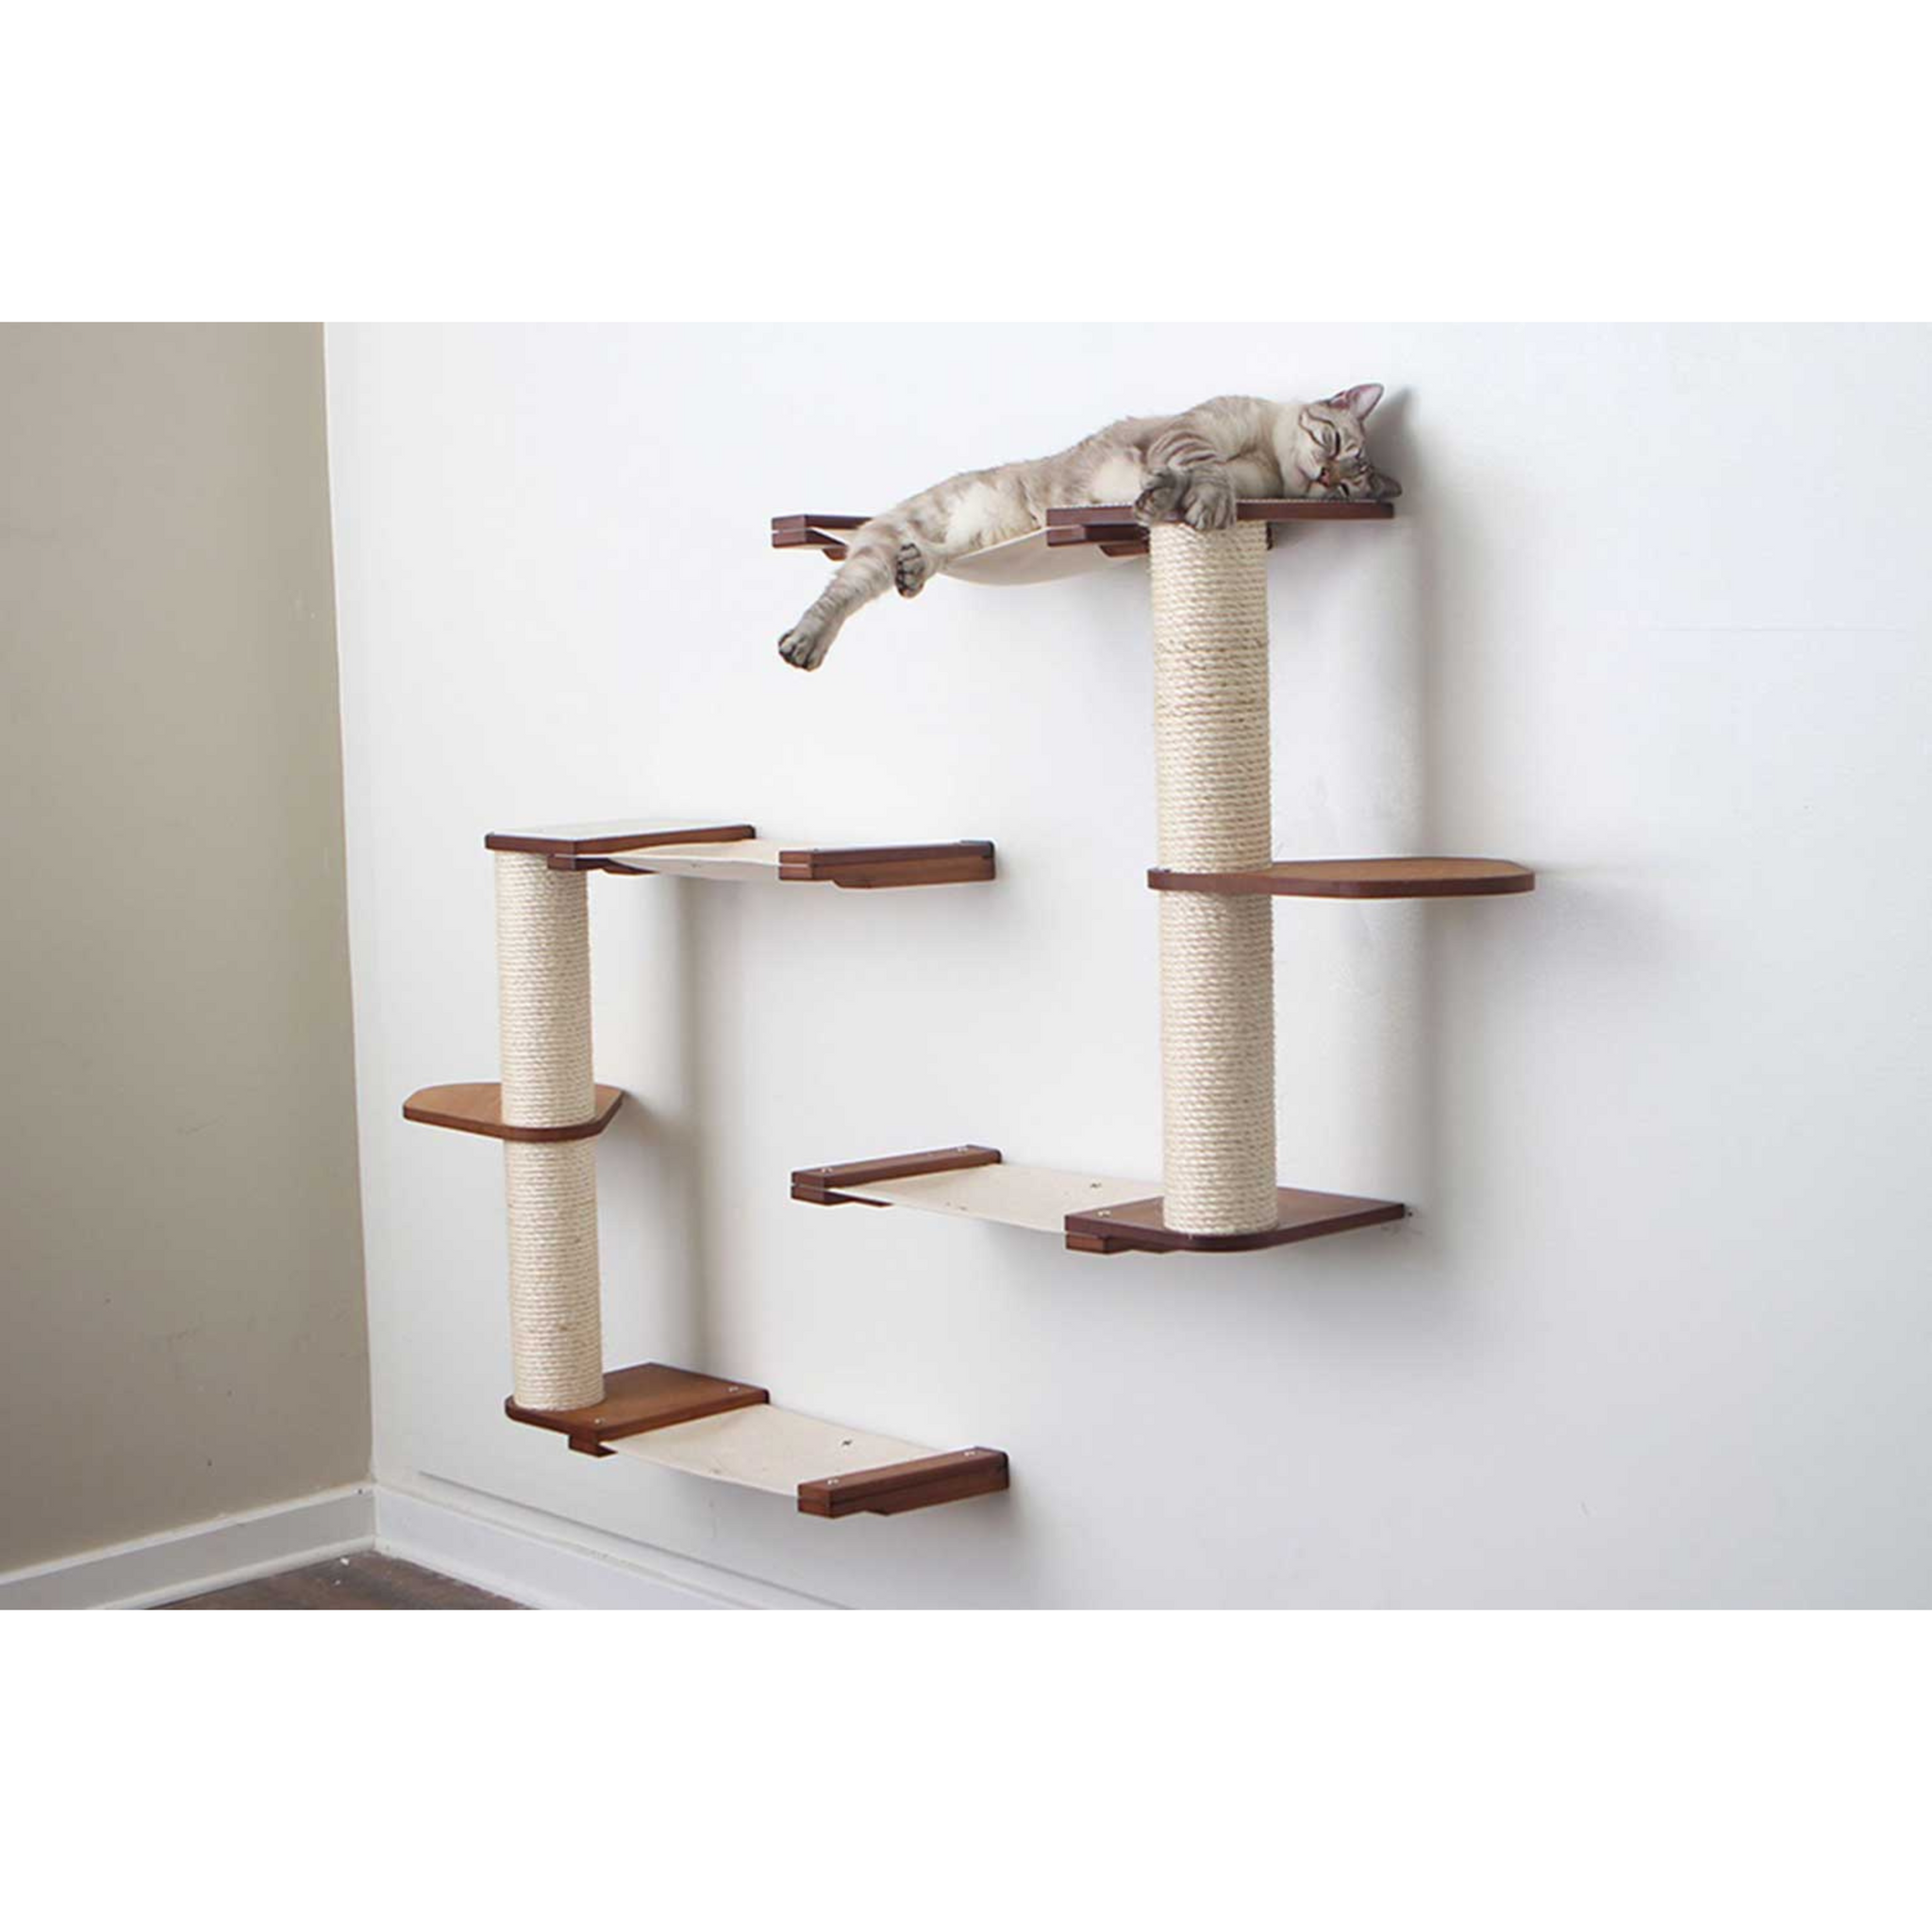 The Catacombs Cat Condo: Cat Scratcher Lounge by Catastrophic Creations